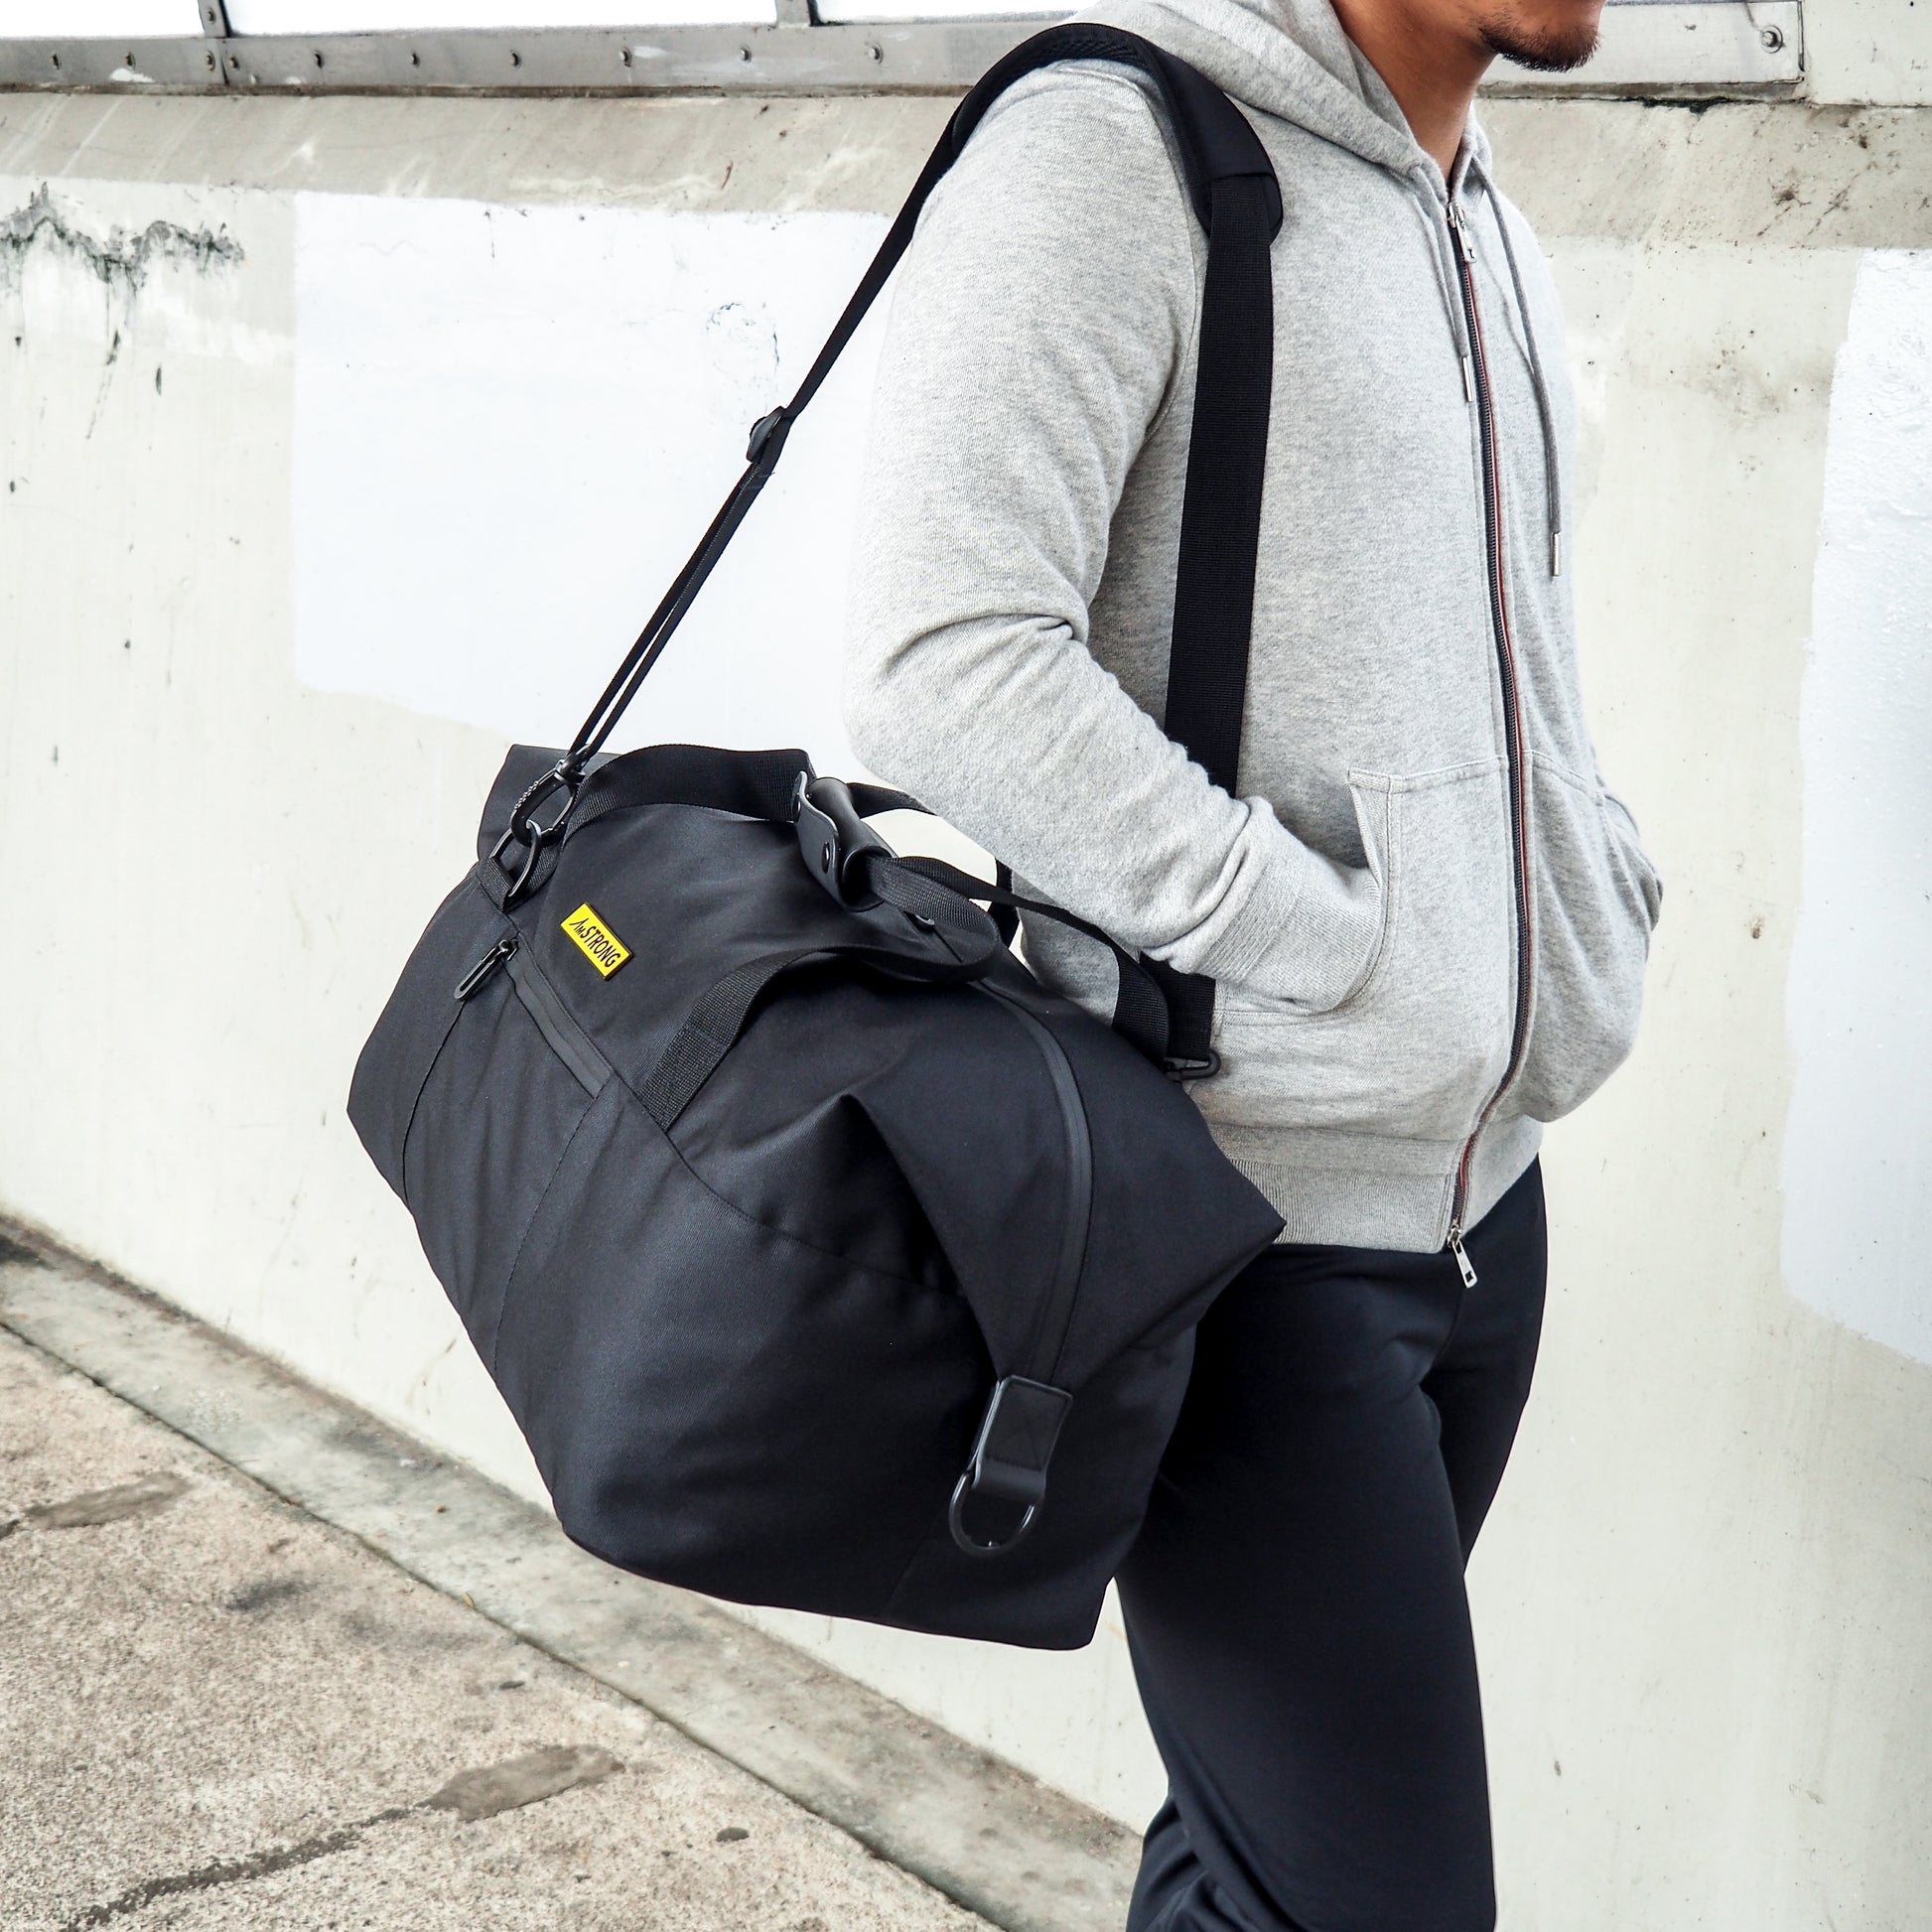 man carrying a black duffel with his hands inside hoodie's pockets